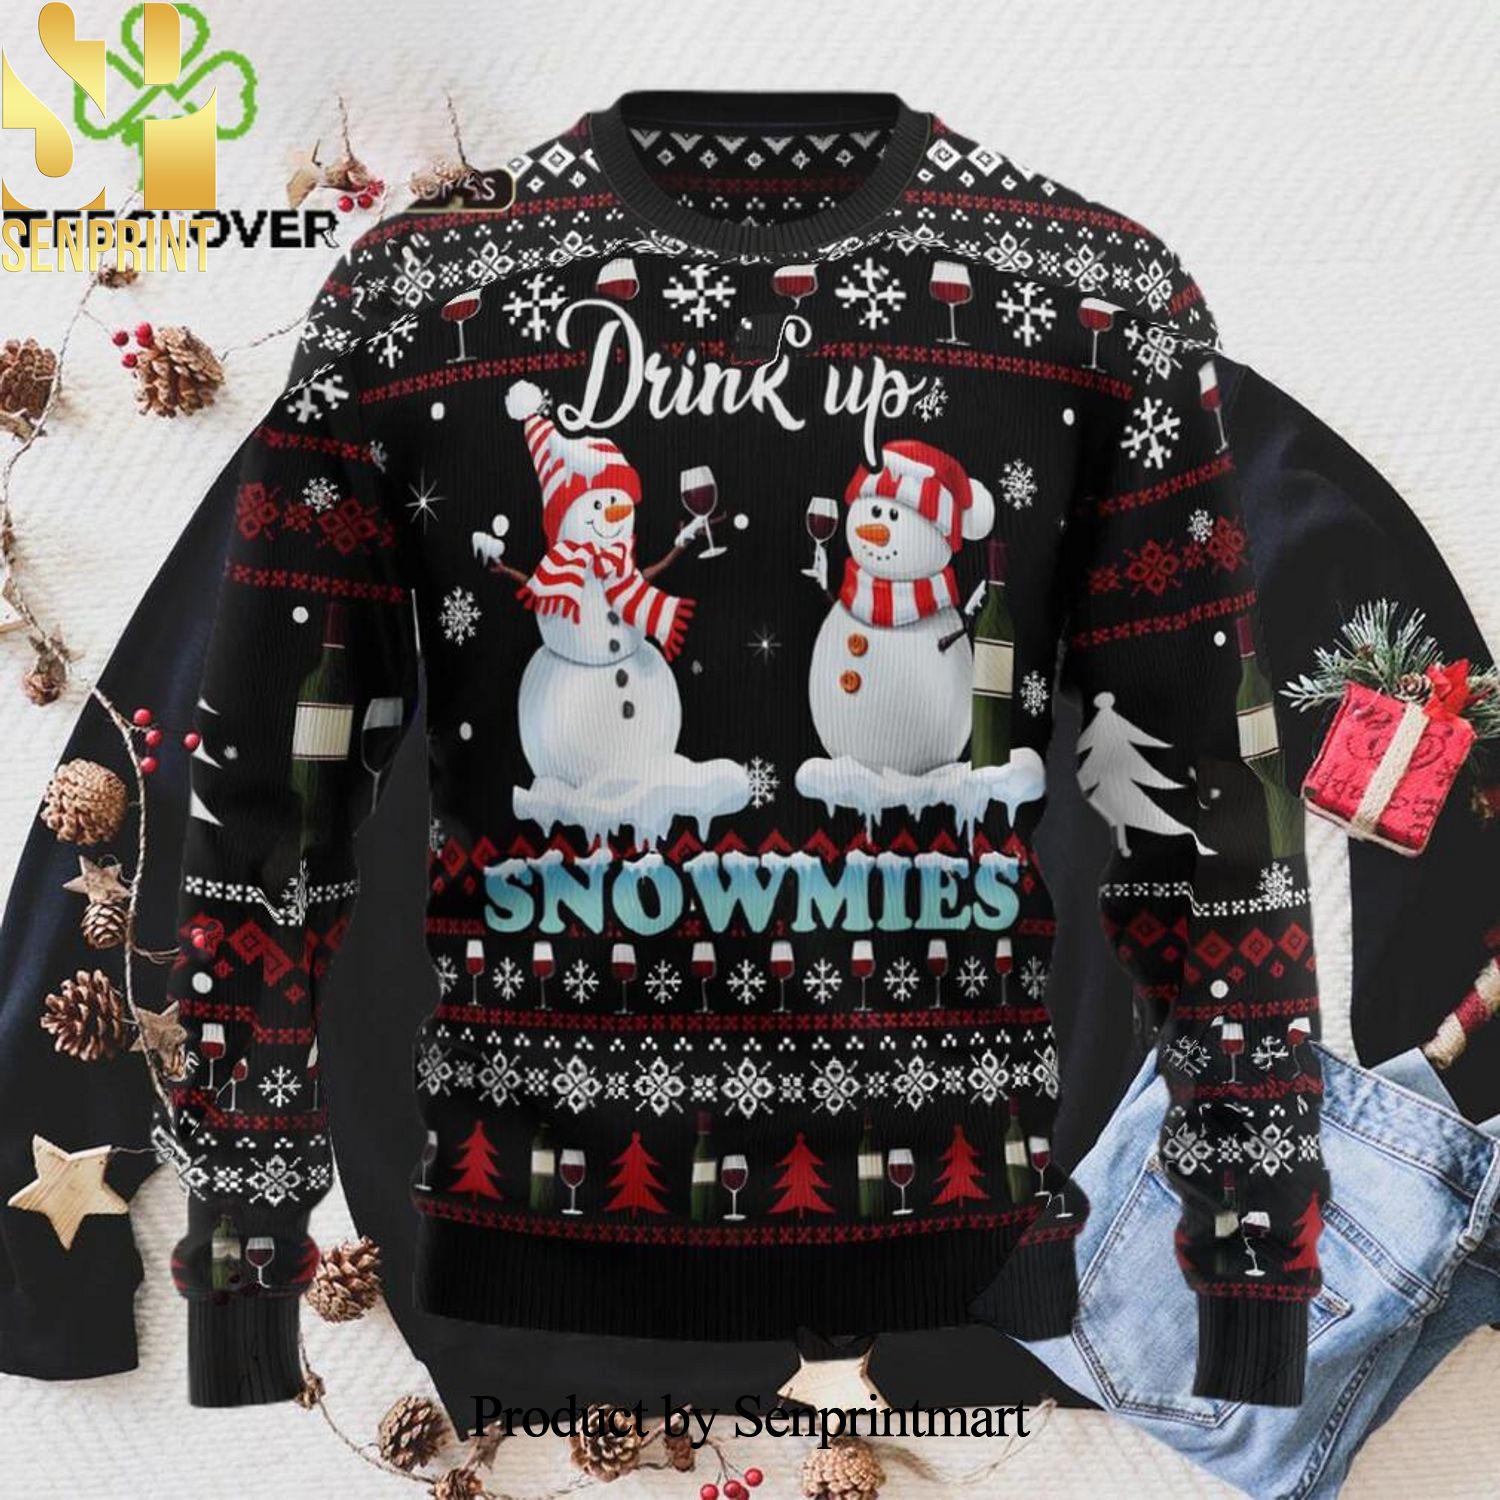 Drink up Wine Snowmies Xmas Ugly Christmas Holiday Sweater